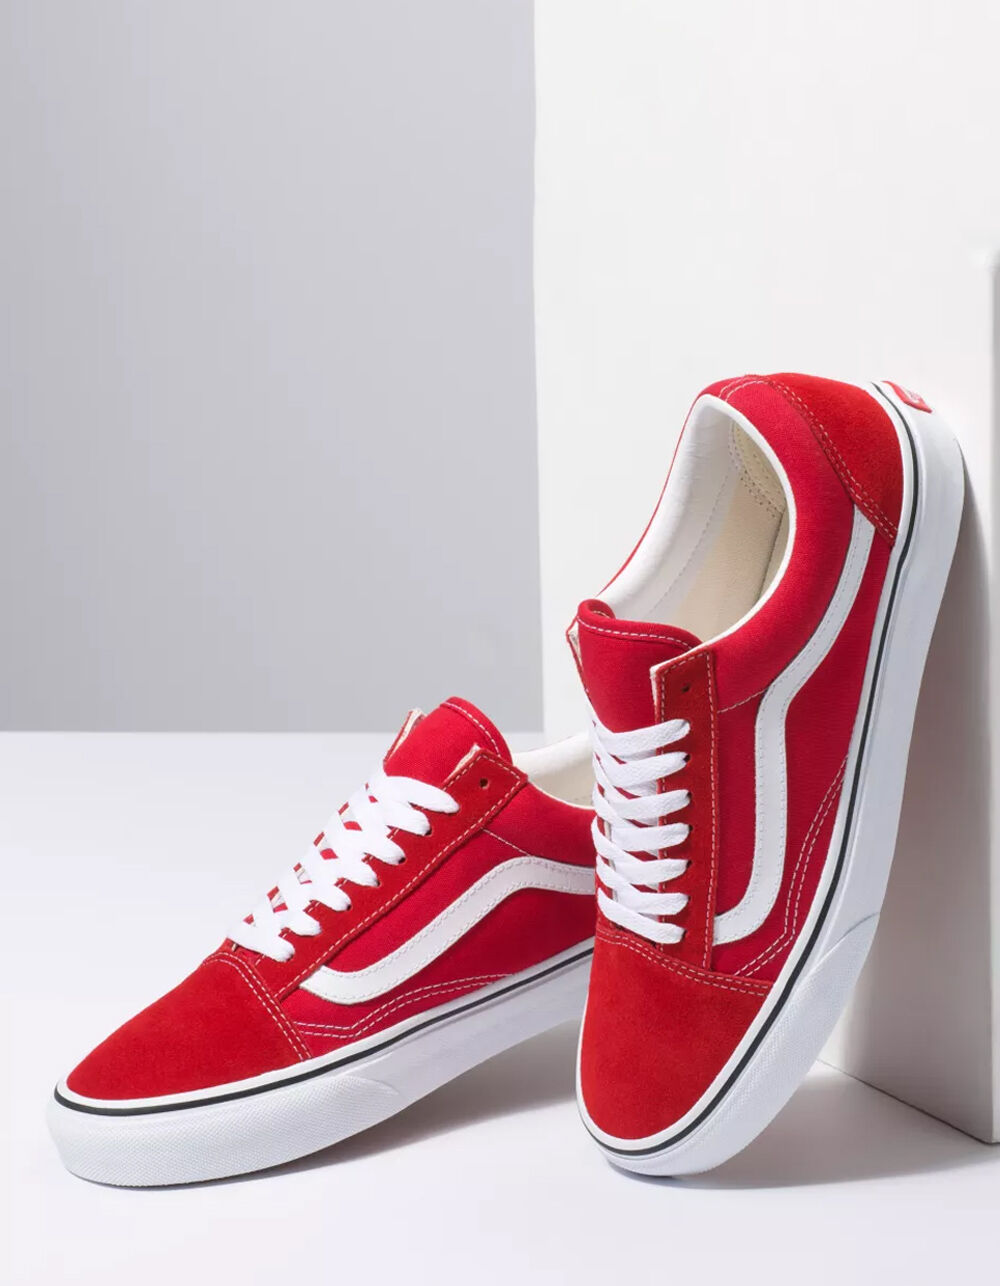 luchthaven tint chaos VANS Old Skool Racing Red & True White Shoes - RACING RED/TRUE WHITE |  Tillys